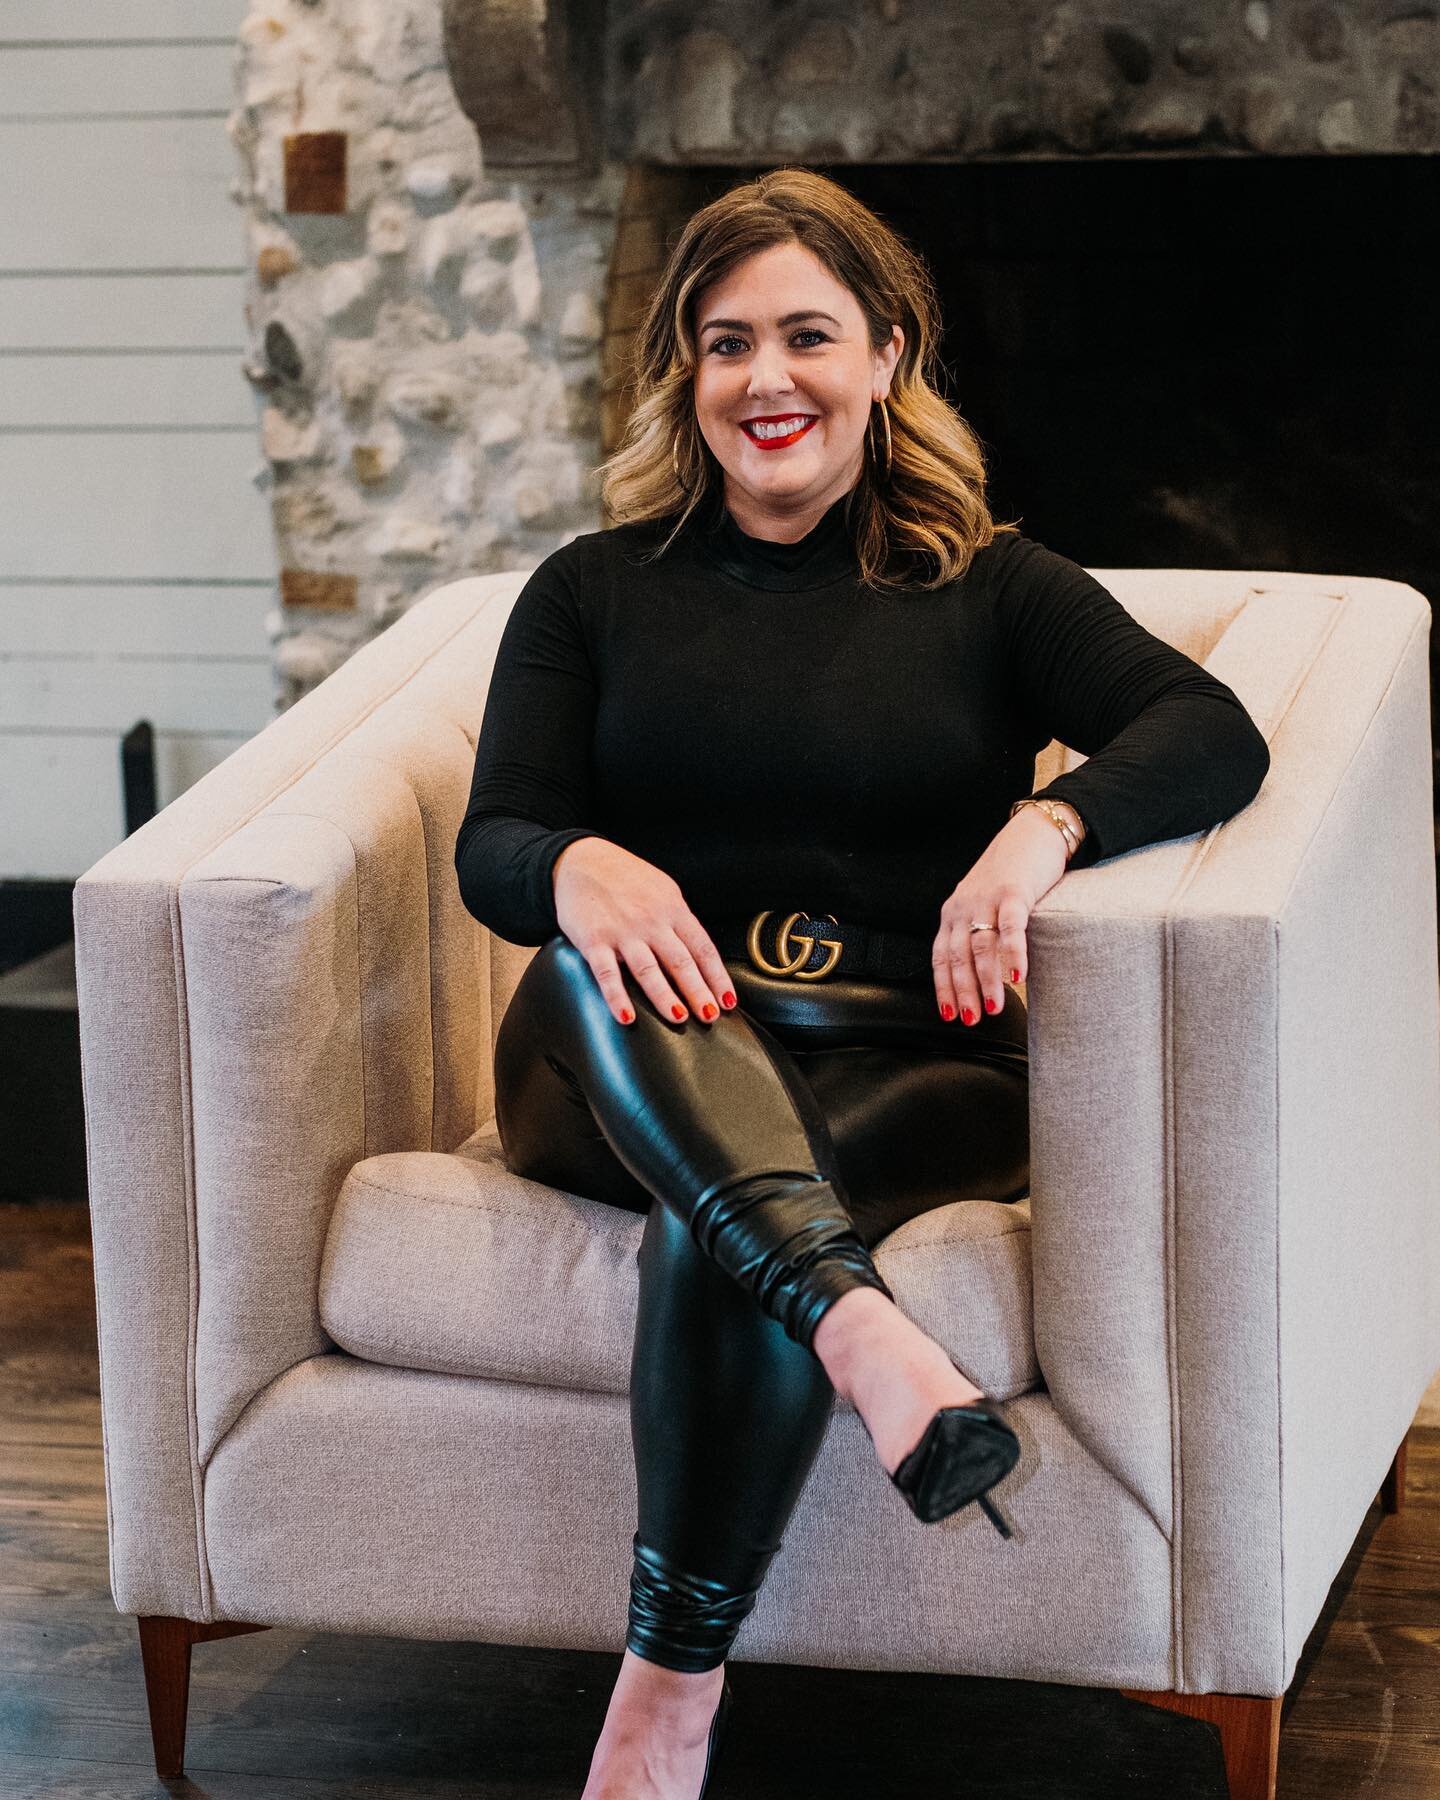 Meet Brittany.✨

Brittany has been in the wedding industry for years, just in a different facet with her on-site hair &amp; makeup company. She has always loved weddings.  A few weeks ago at my birthday dinner we witnessed a couple get engaged and it